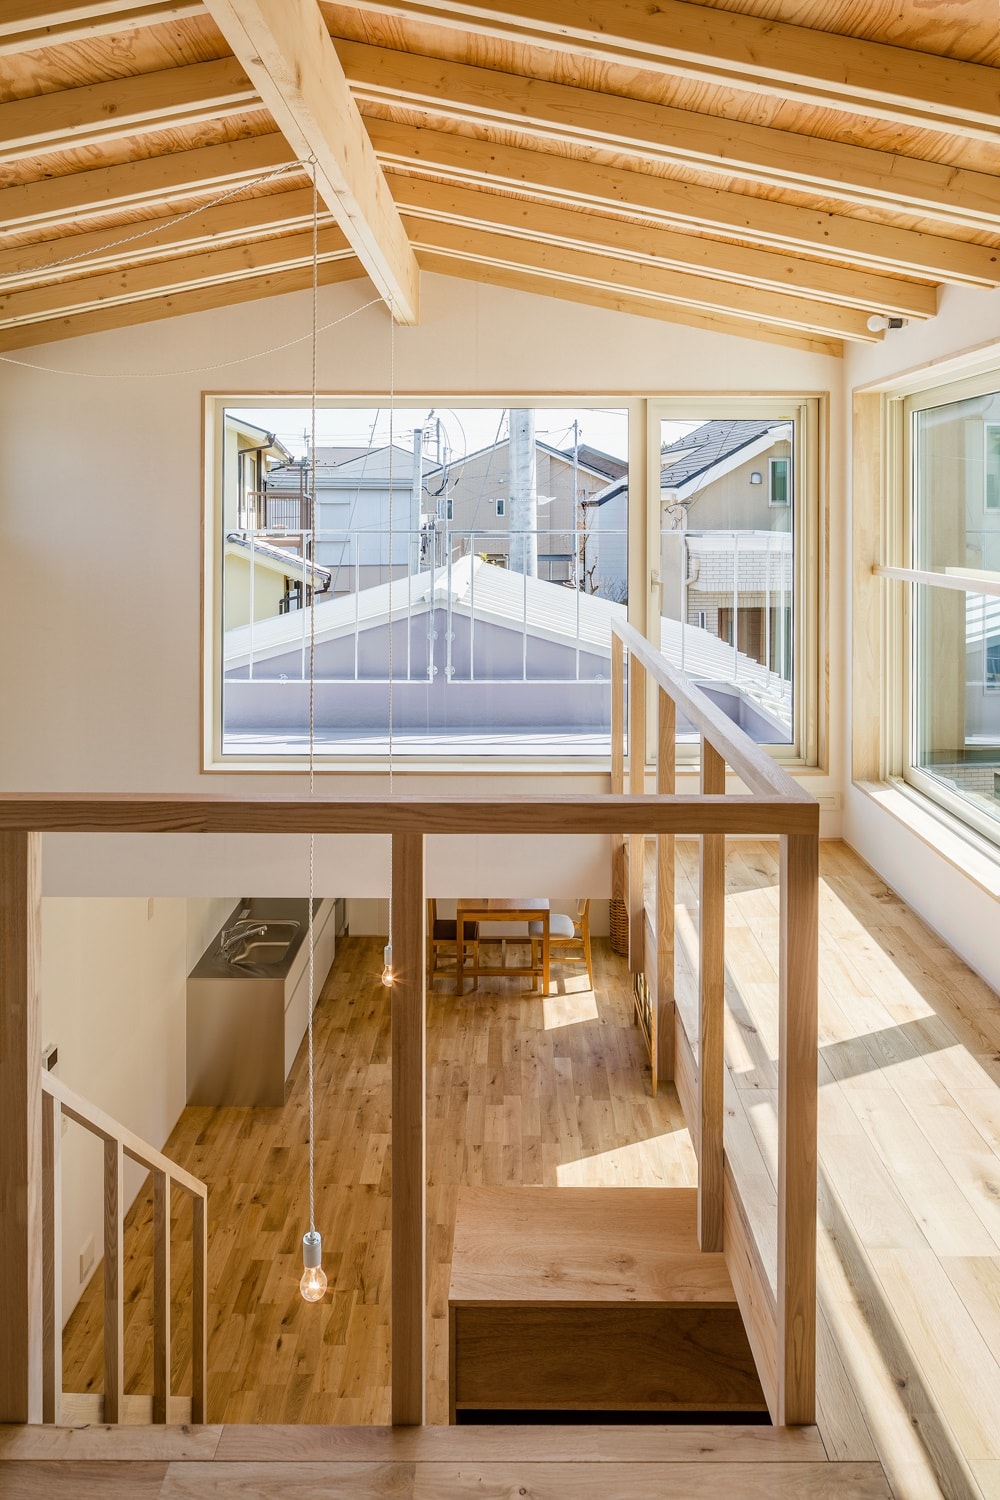 Keeping Life Simple: SNARK+OUVI's House in Chiba